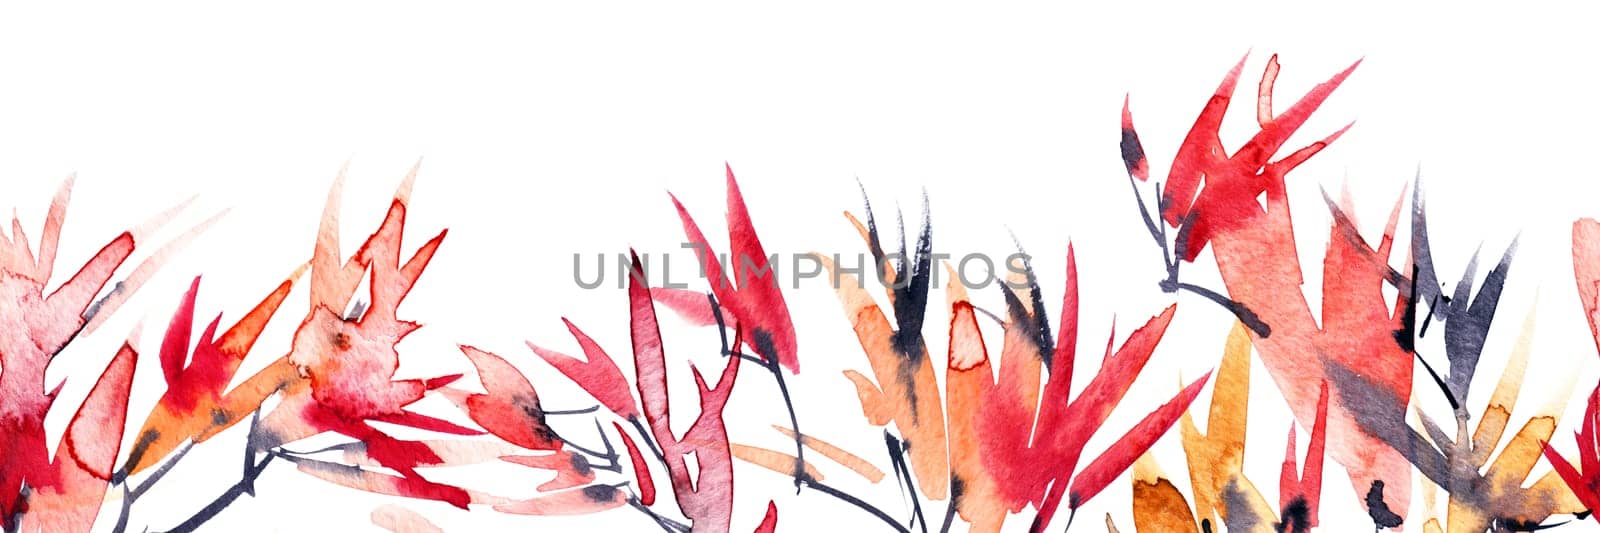 Autumn tree with orange and red leaves on white background - horizontal seamless border design. Hand drawn artistic painting in sumi-e style, Japanese painting, Chinese painting.